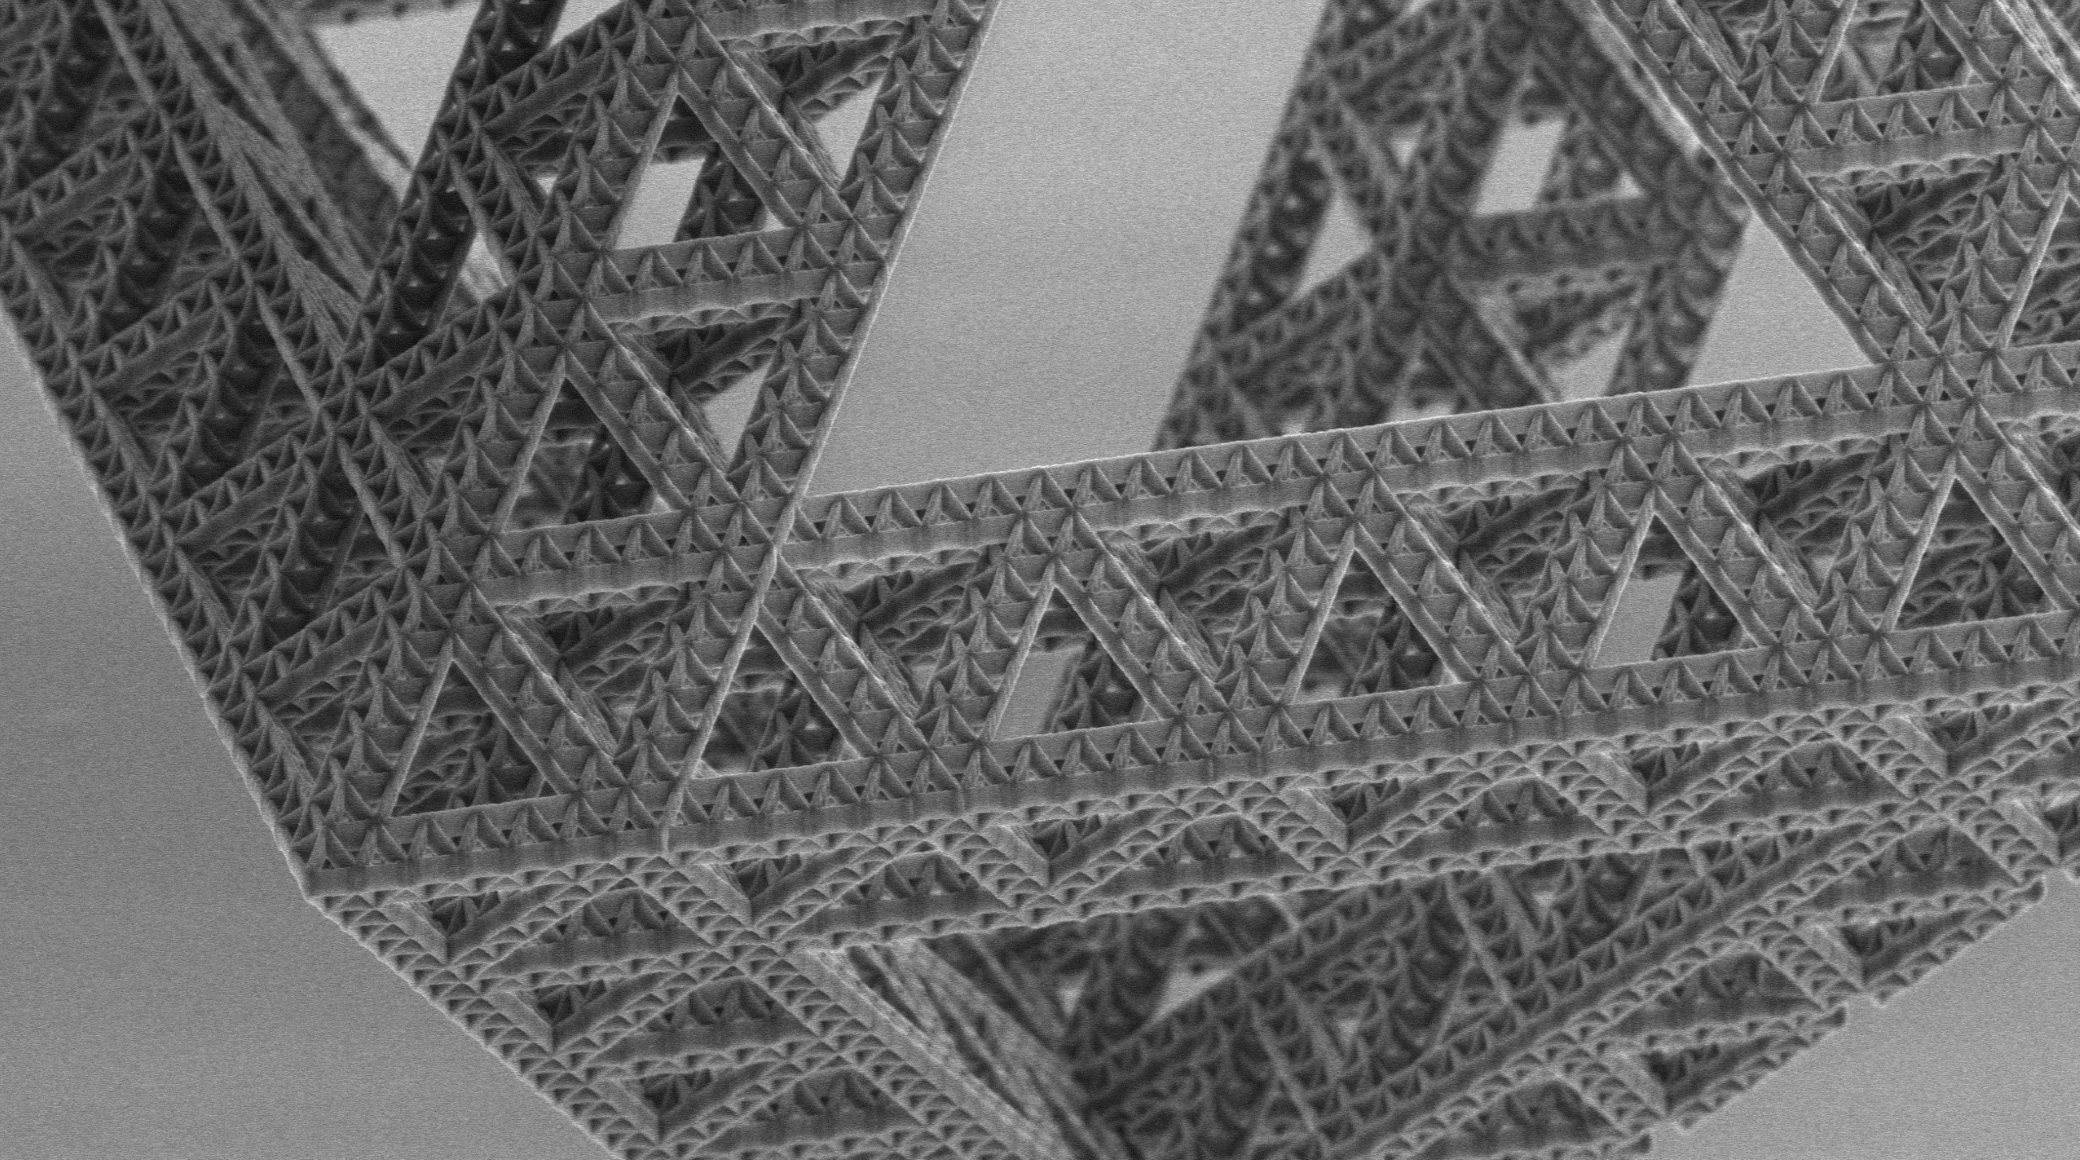 Nanoarchitected Materials - Redefining Materials Design from the Nanoscale Up